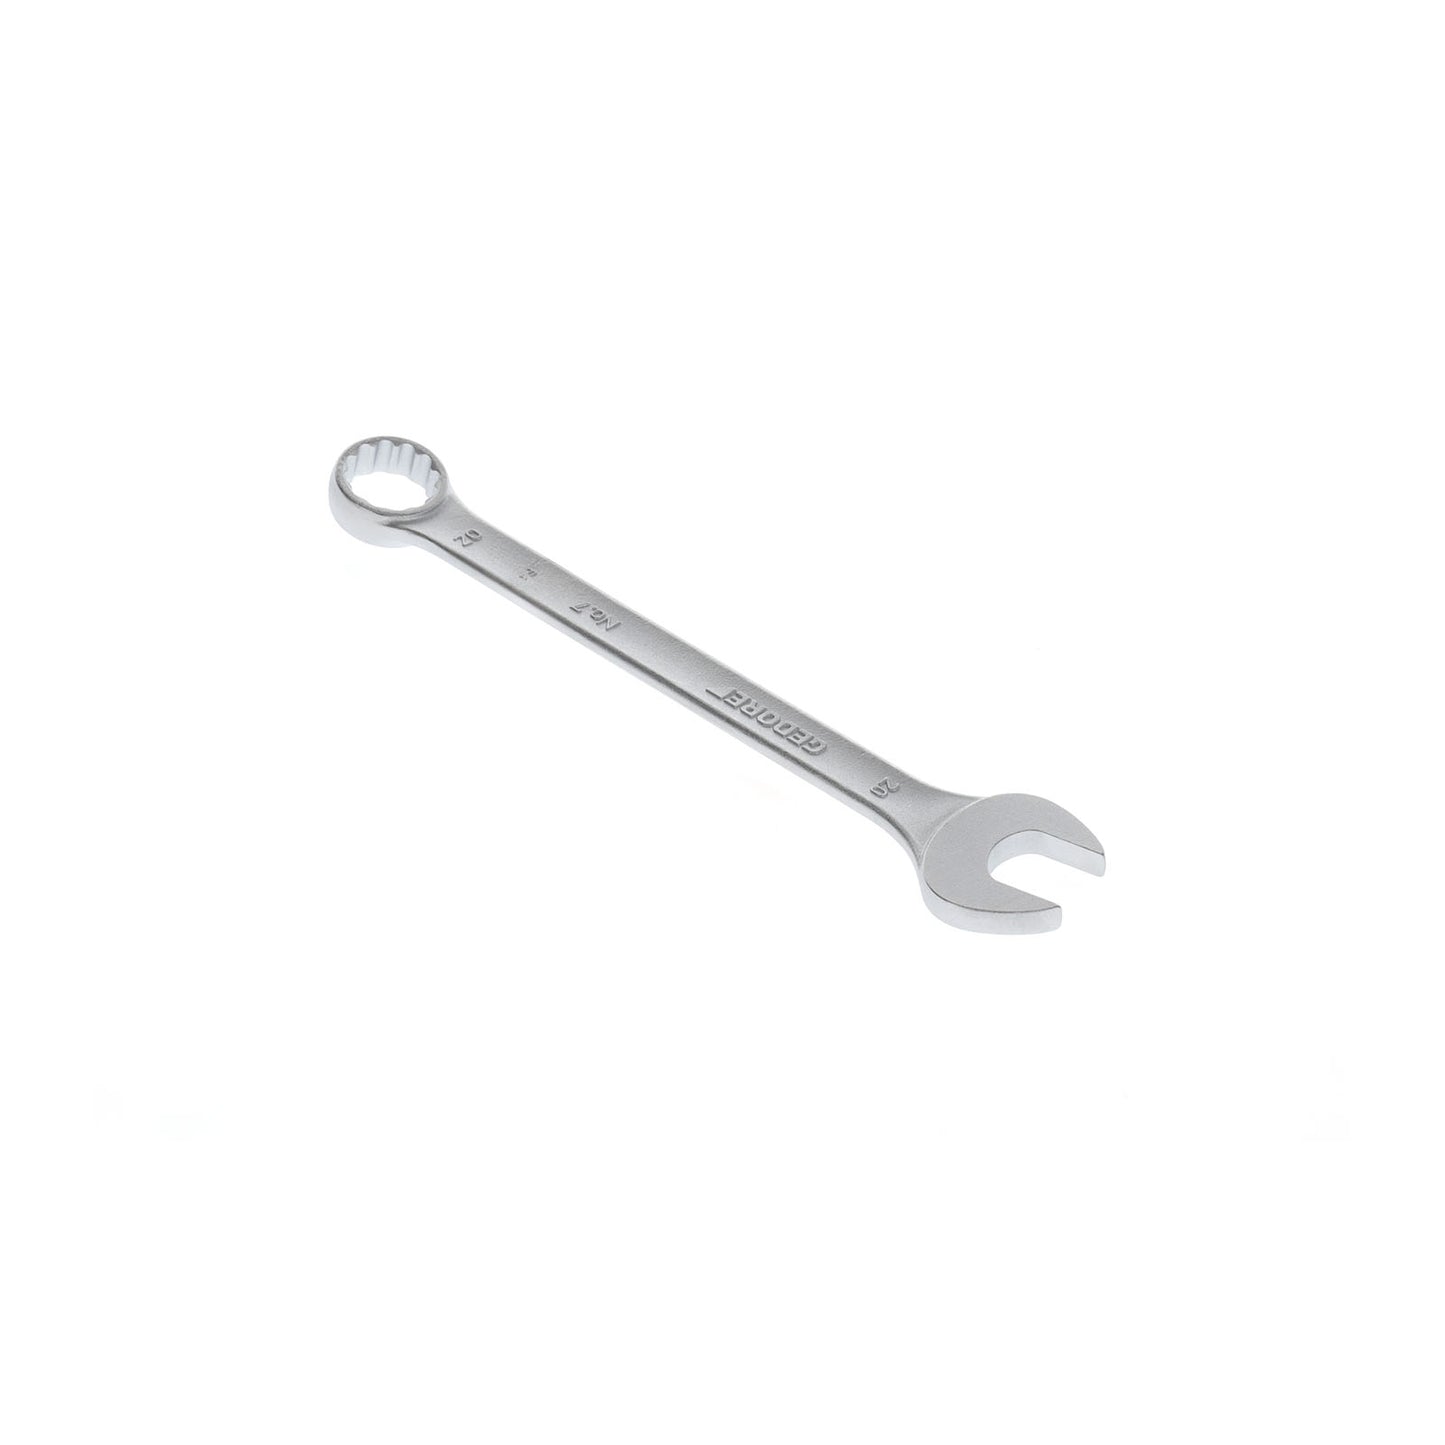 GEDORE 7 20 - Combination Wrench, 20 mm (6091960)